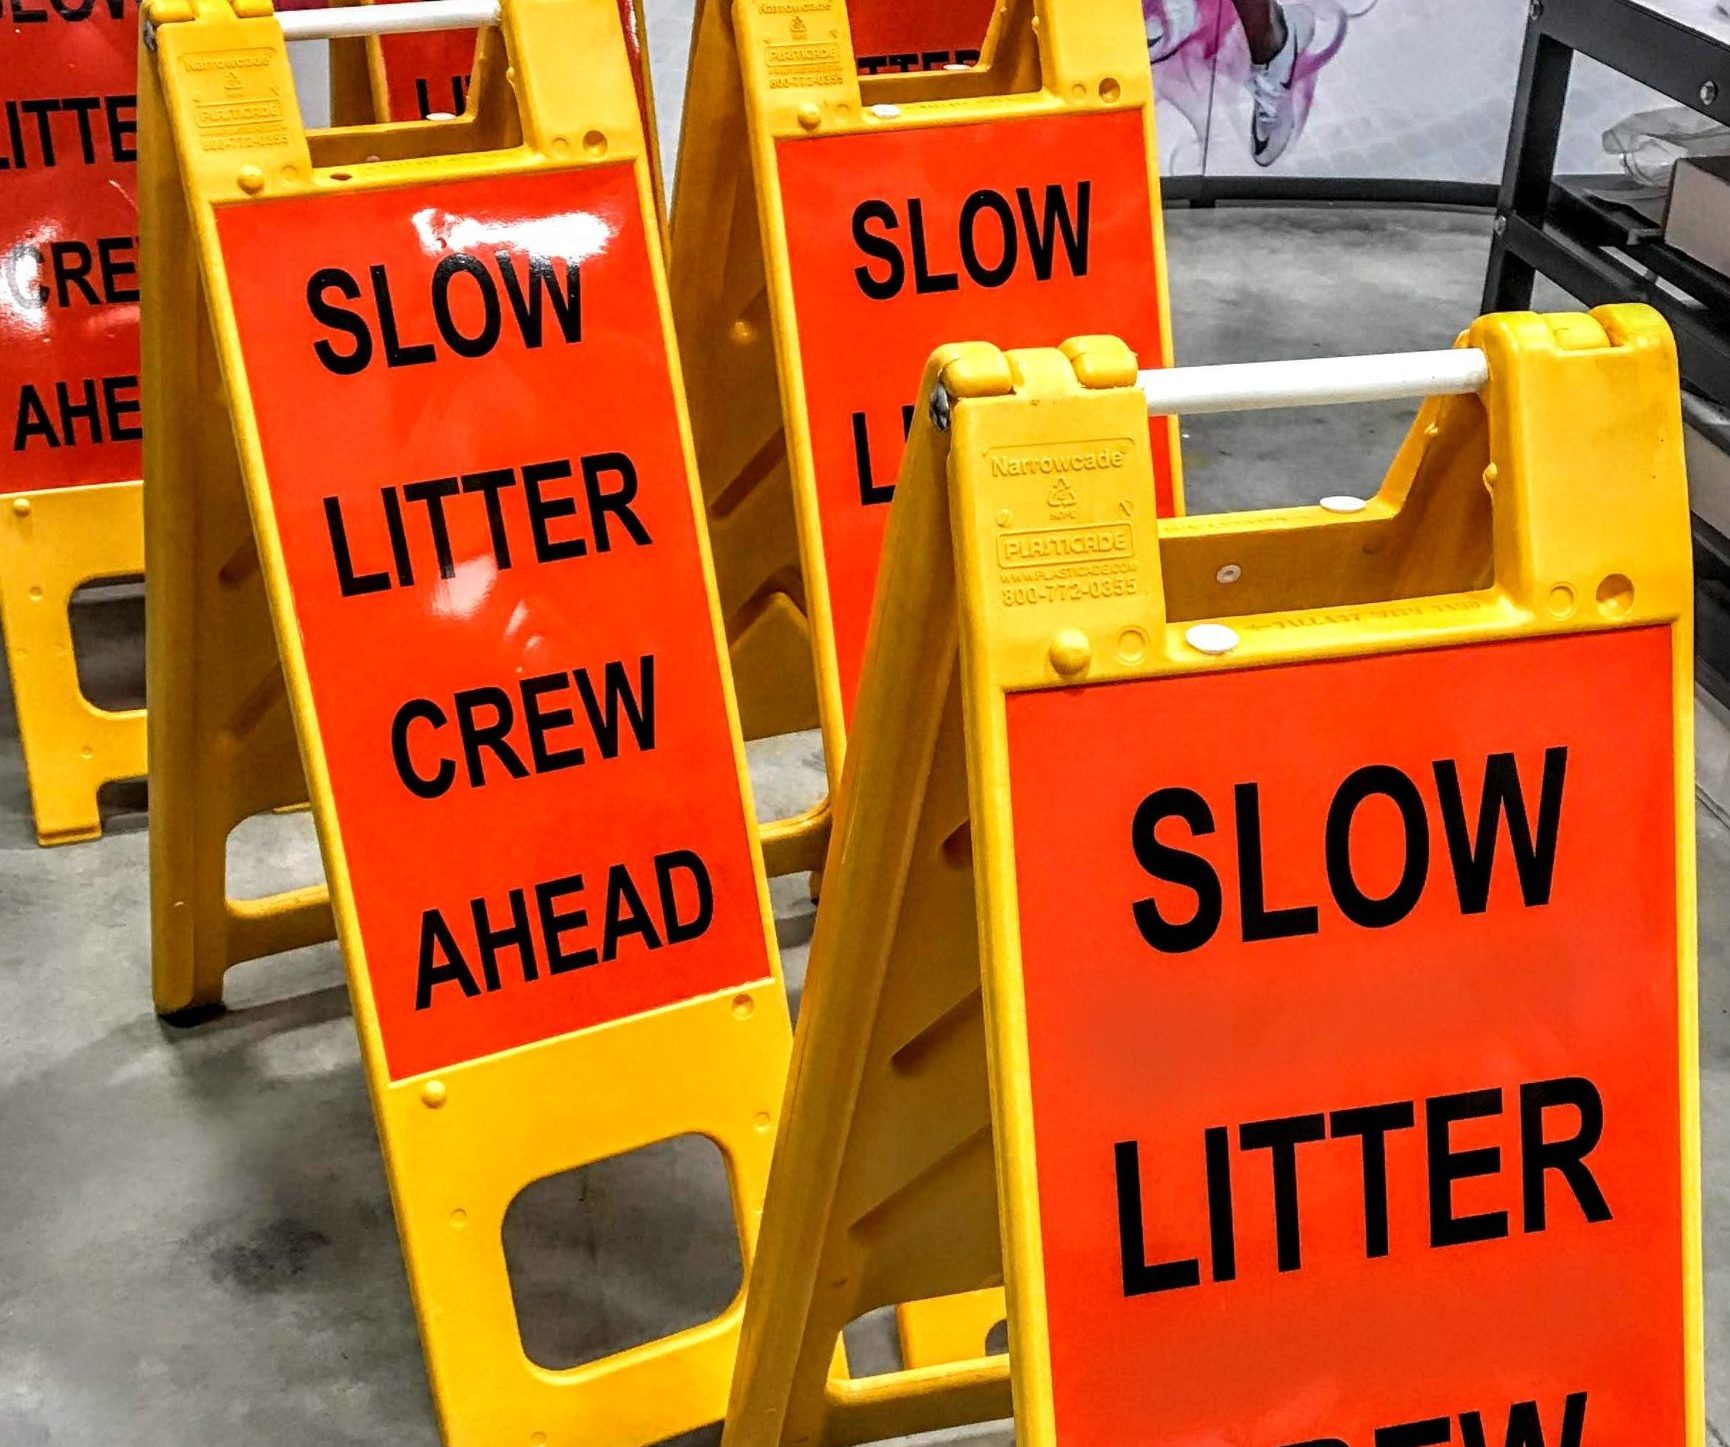 Slow Litter Crew Ahead a frame